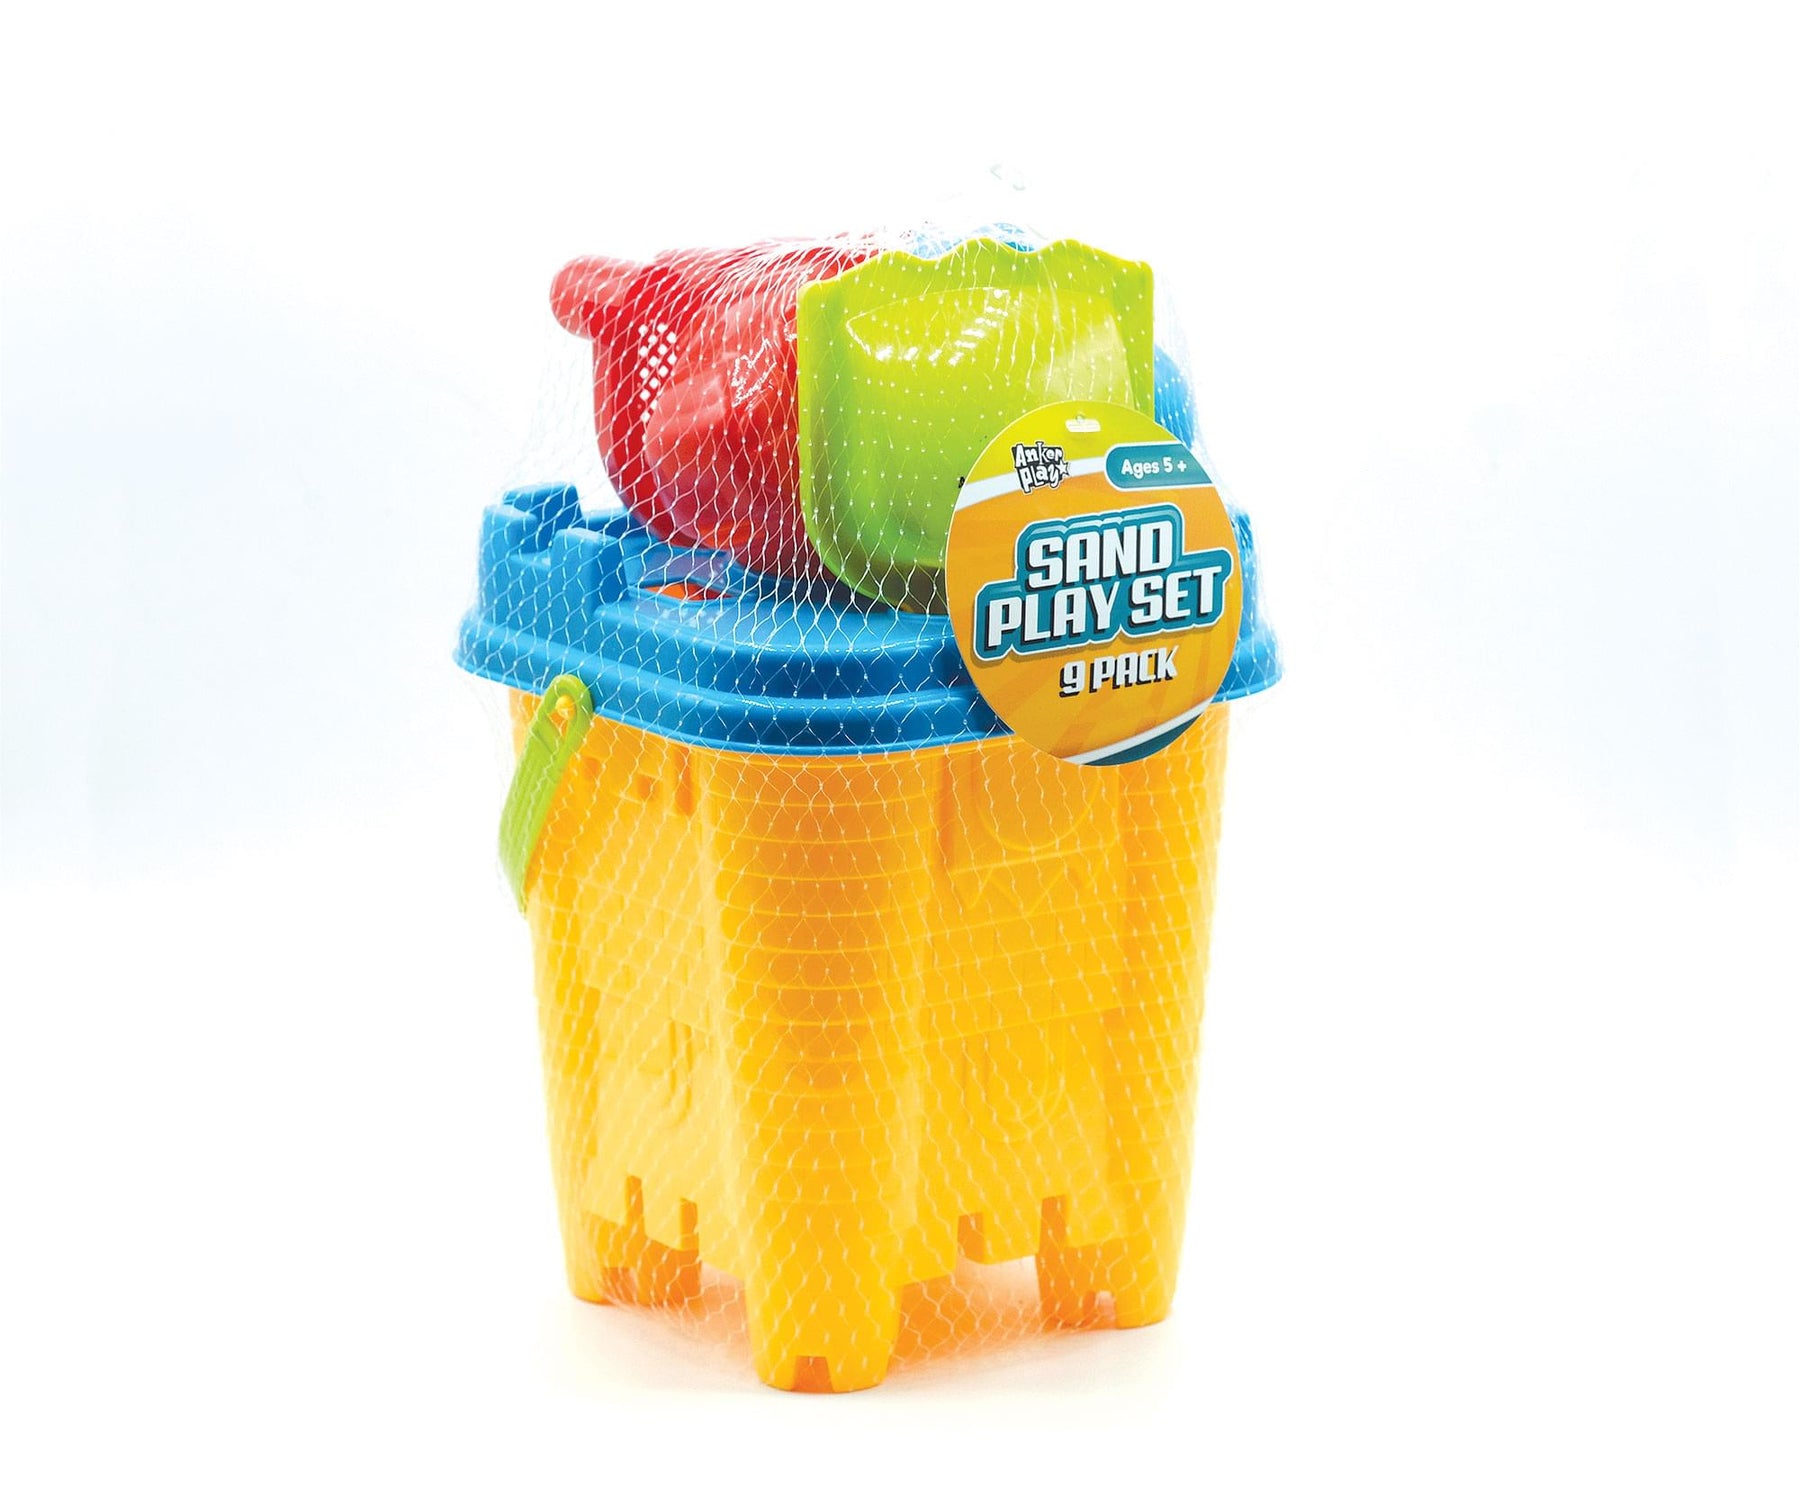 9 Piece Sand Bucket Set | Yellow with Blue Lid